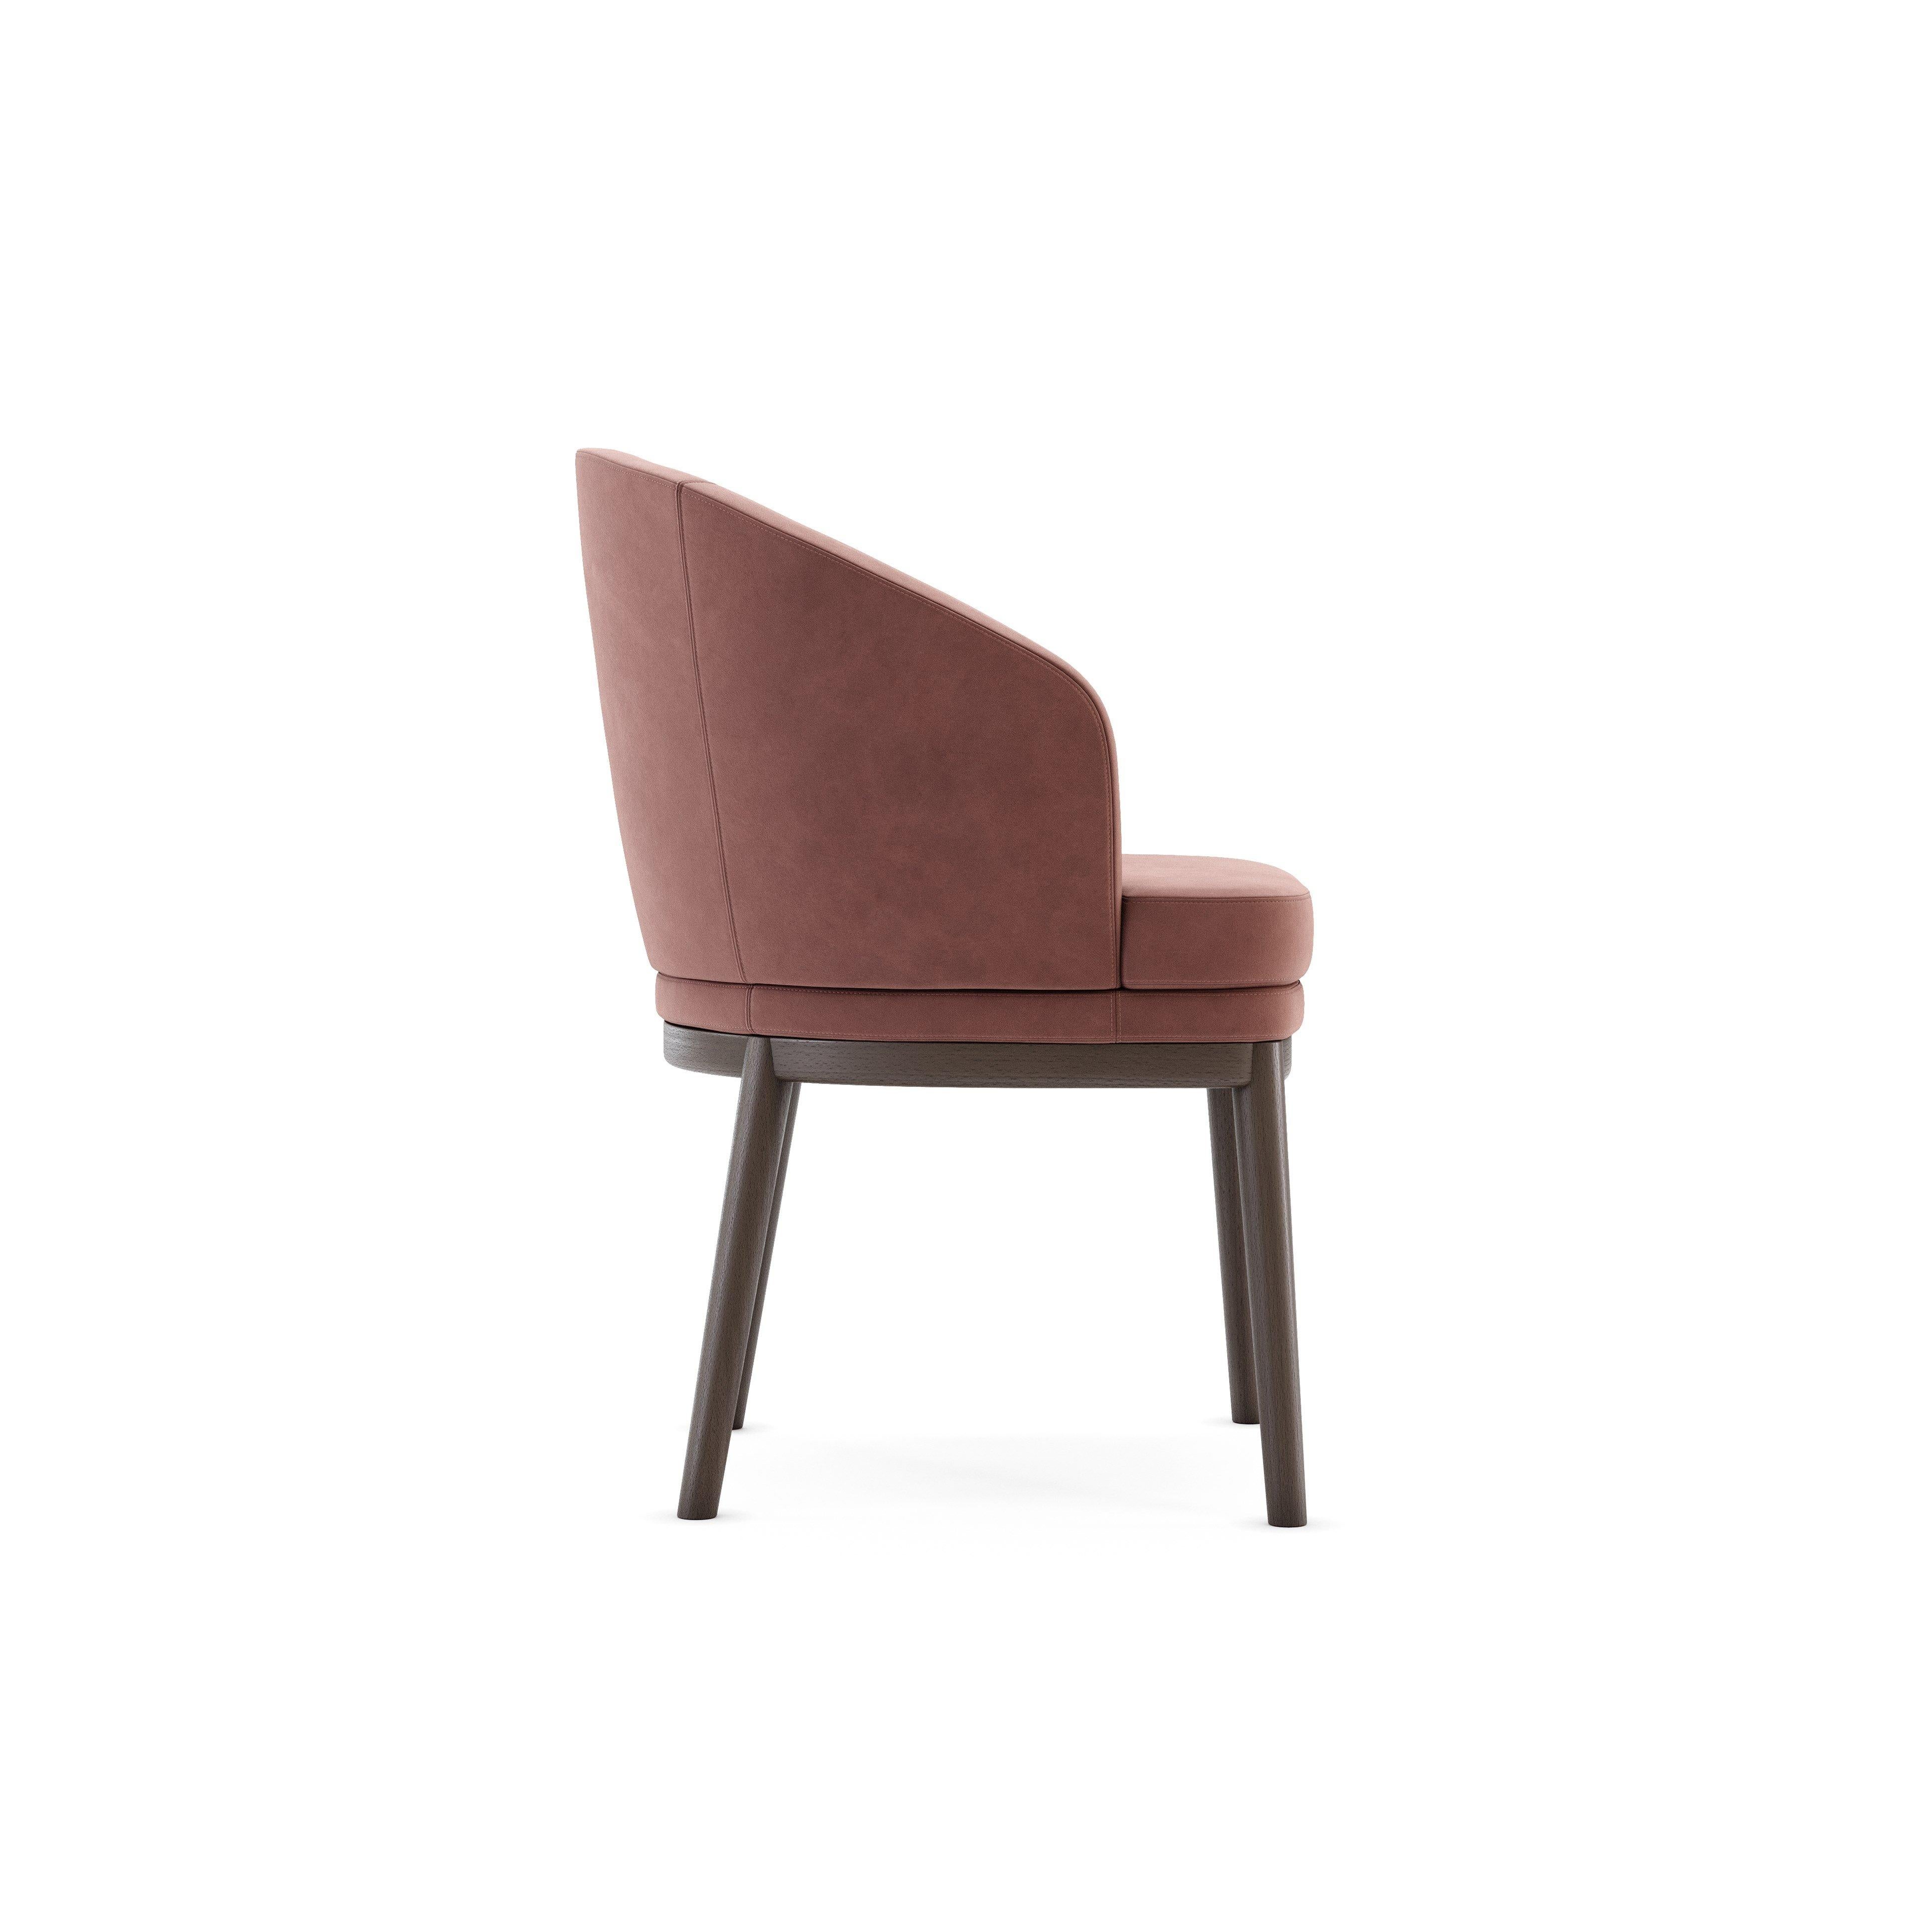 Portuguese Contemporary Dining Chair Featuring Fumed Legs & Rose Velvet Seat For Sale